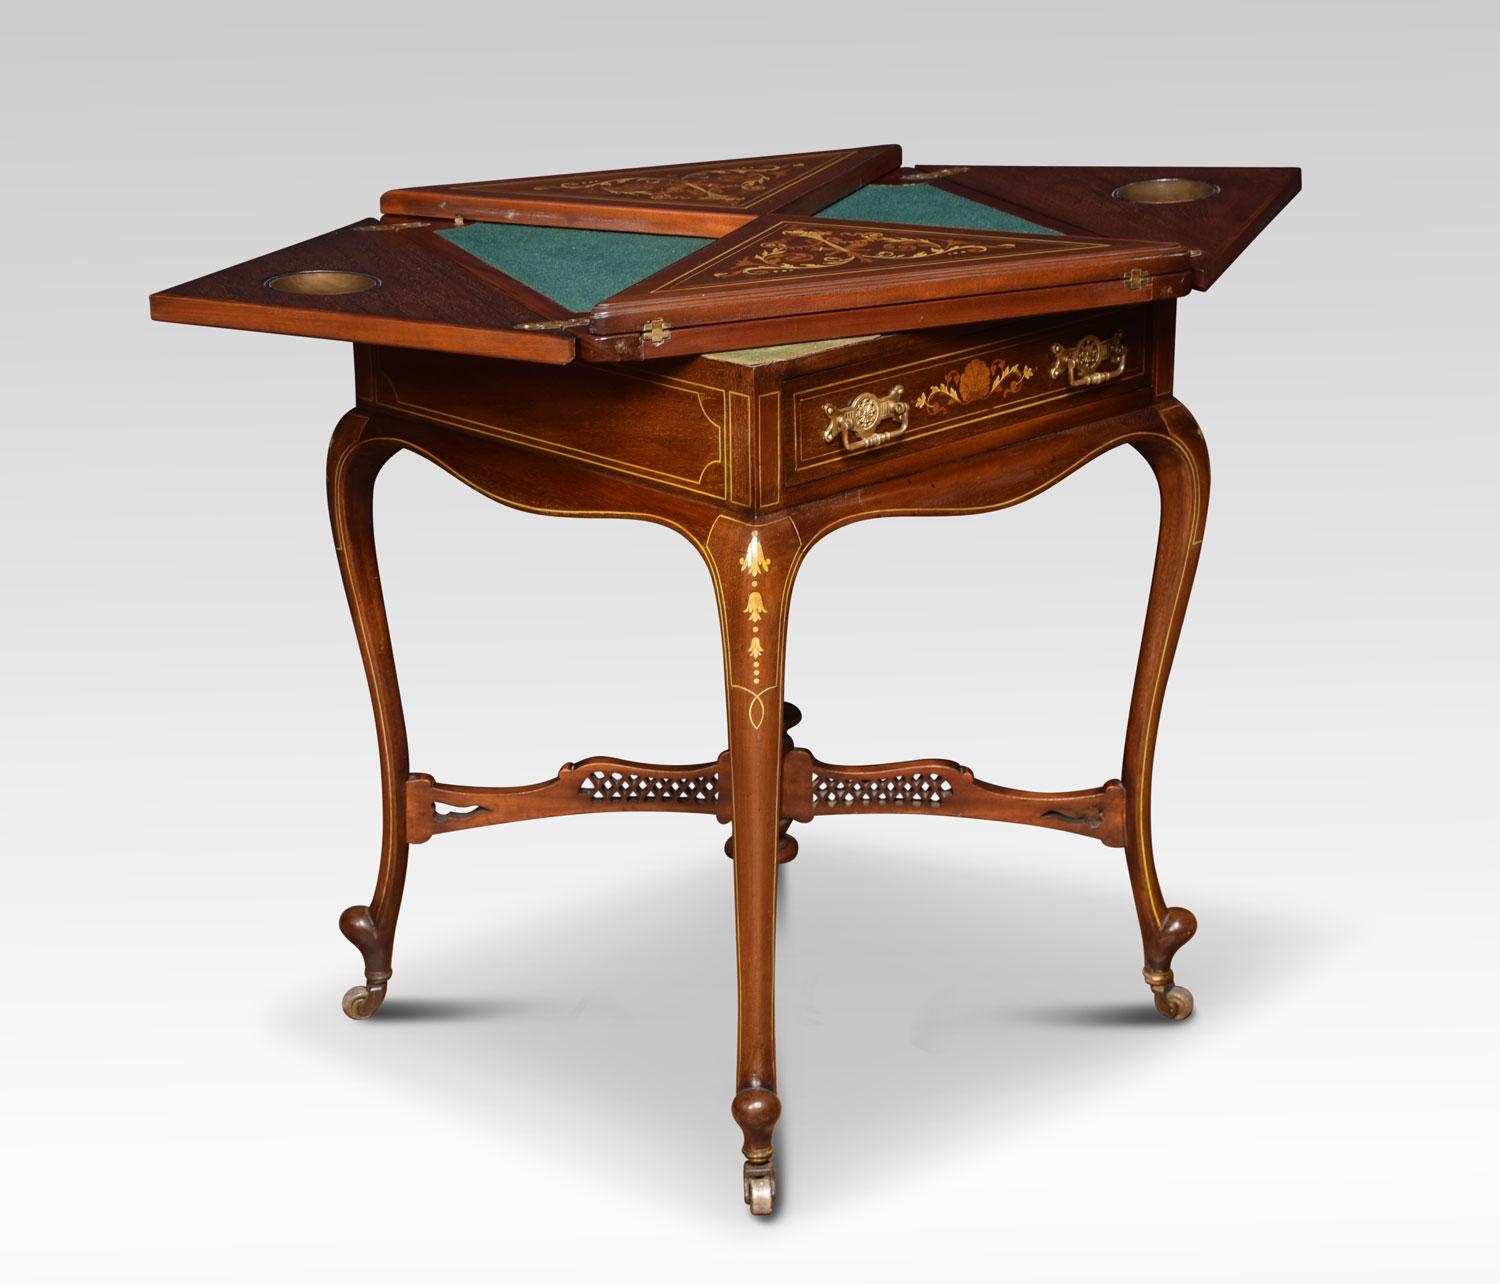 19th century inlaid mahogany envelope card table, the four flap top having floral swags and flower headed inlay. Opening to reveal inset base playing surface with original copper cups. Above a single mahogany lined drawer with brass handles.